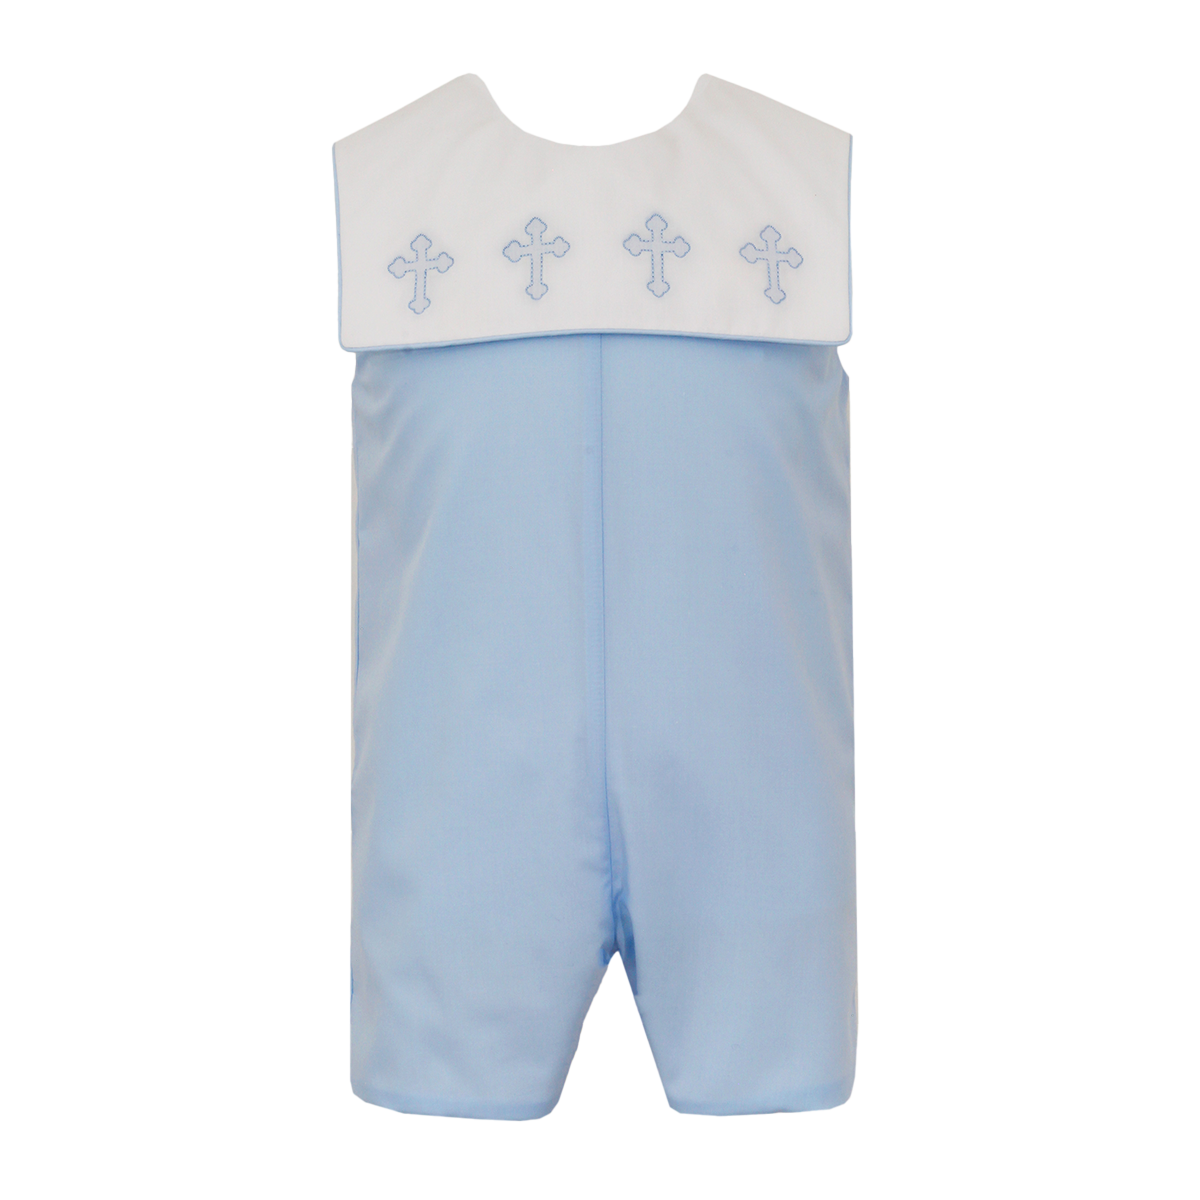 Embroidered Crosses Baby Boy's Blue Easter Shortall by Anavini